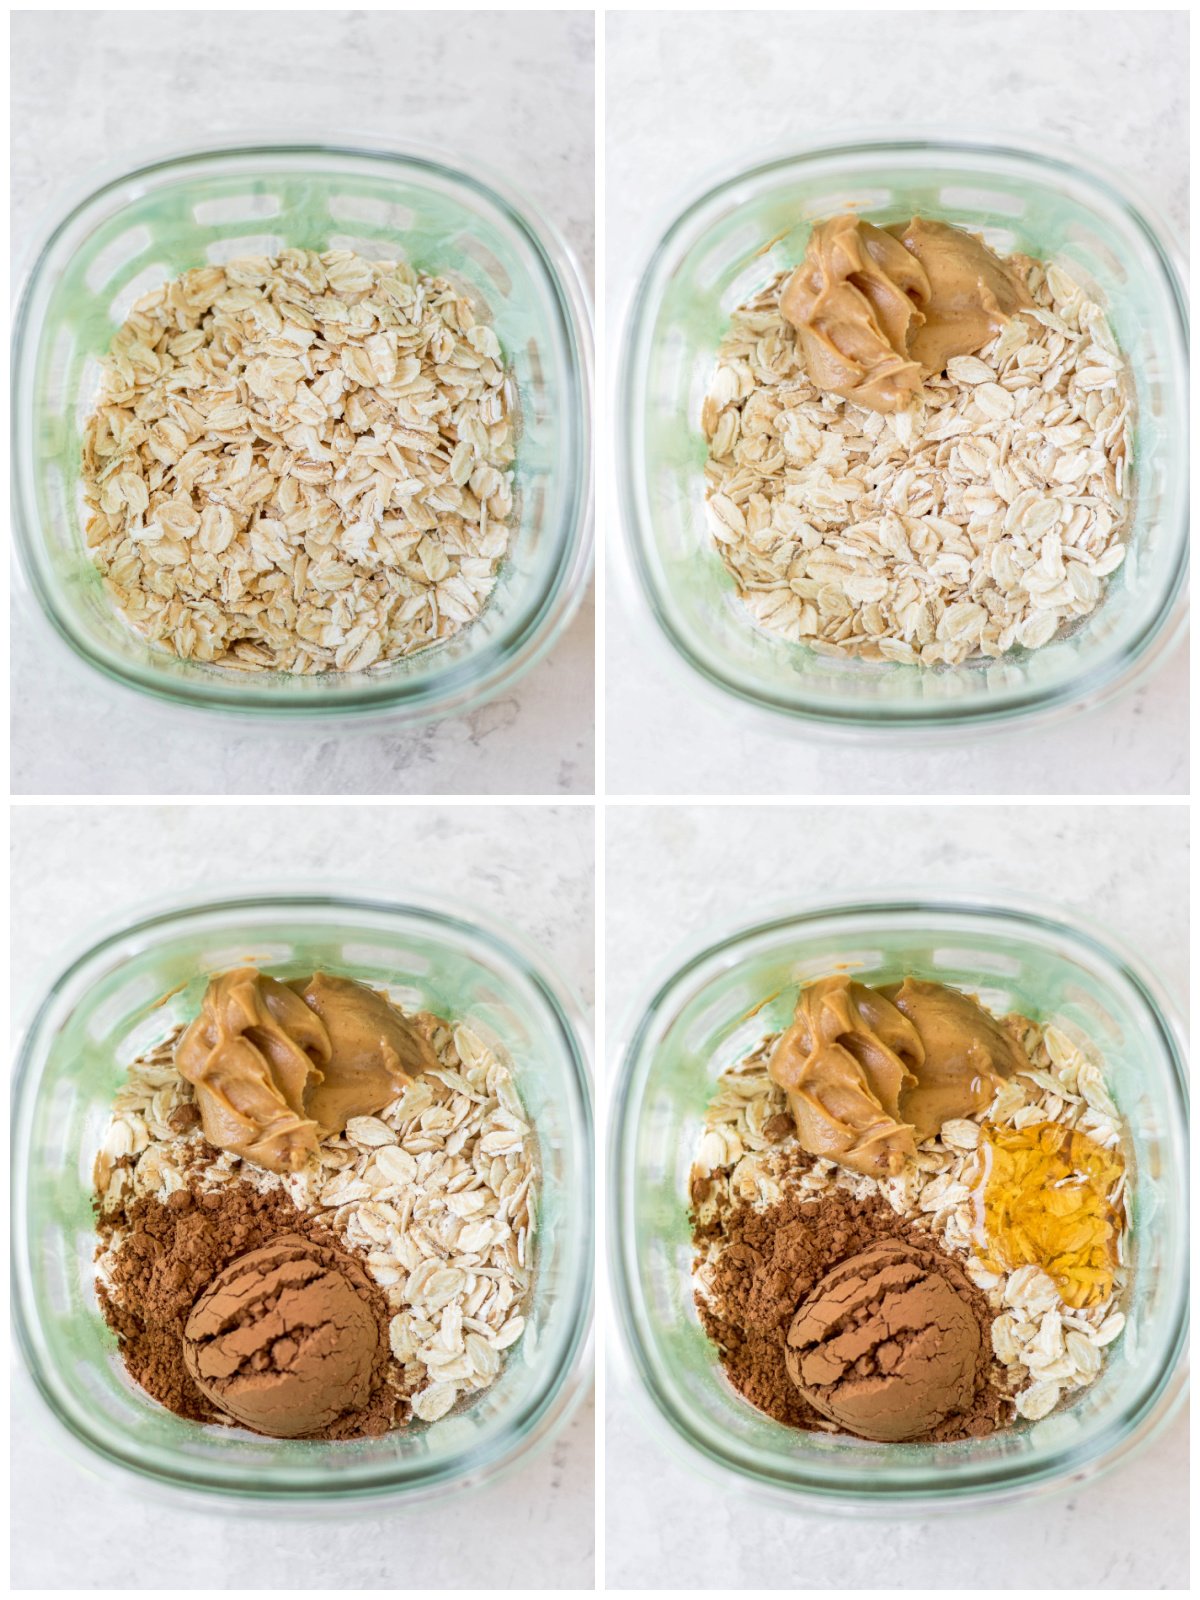 cooking process to make chocolate peanut butter overnight oats